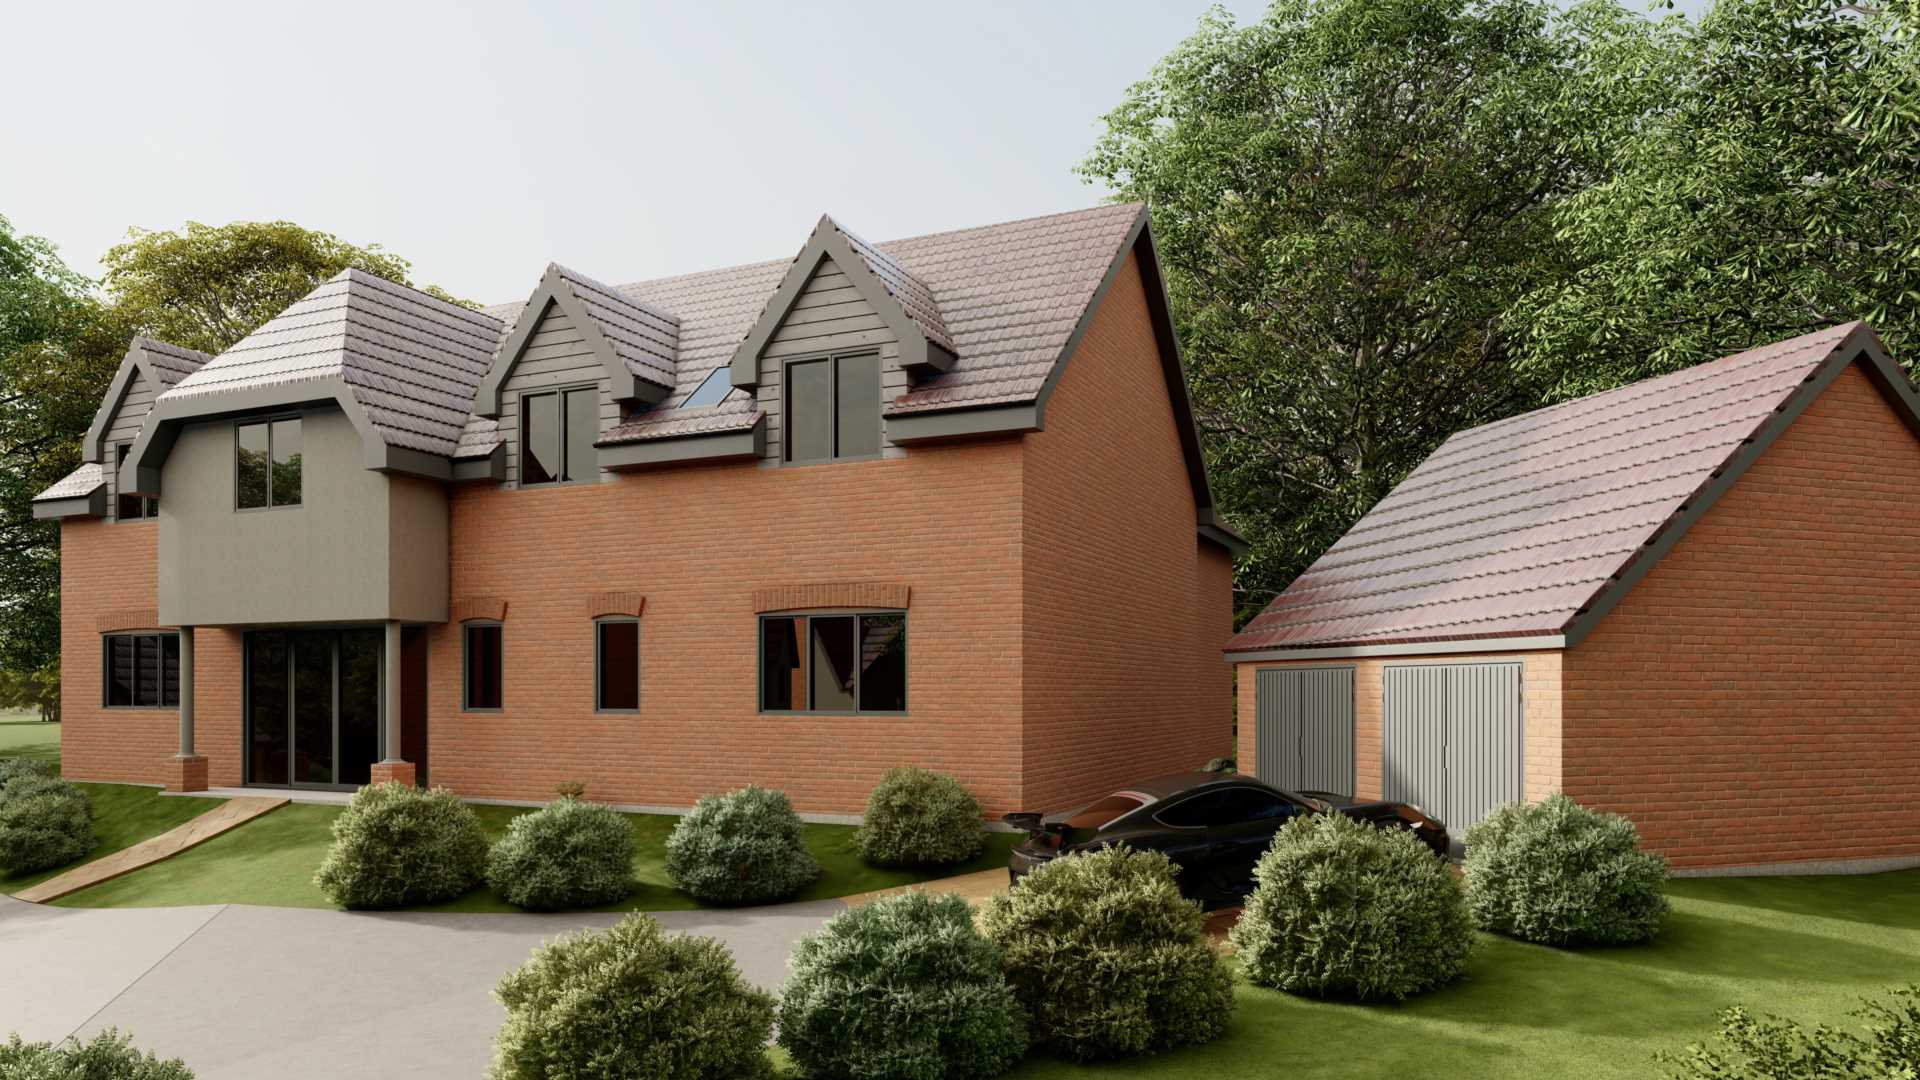 BERKHAMSTED COMING SOON - ELEANOR CLOSE, South Park Gardens, Image 1